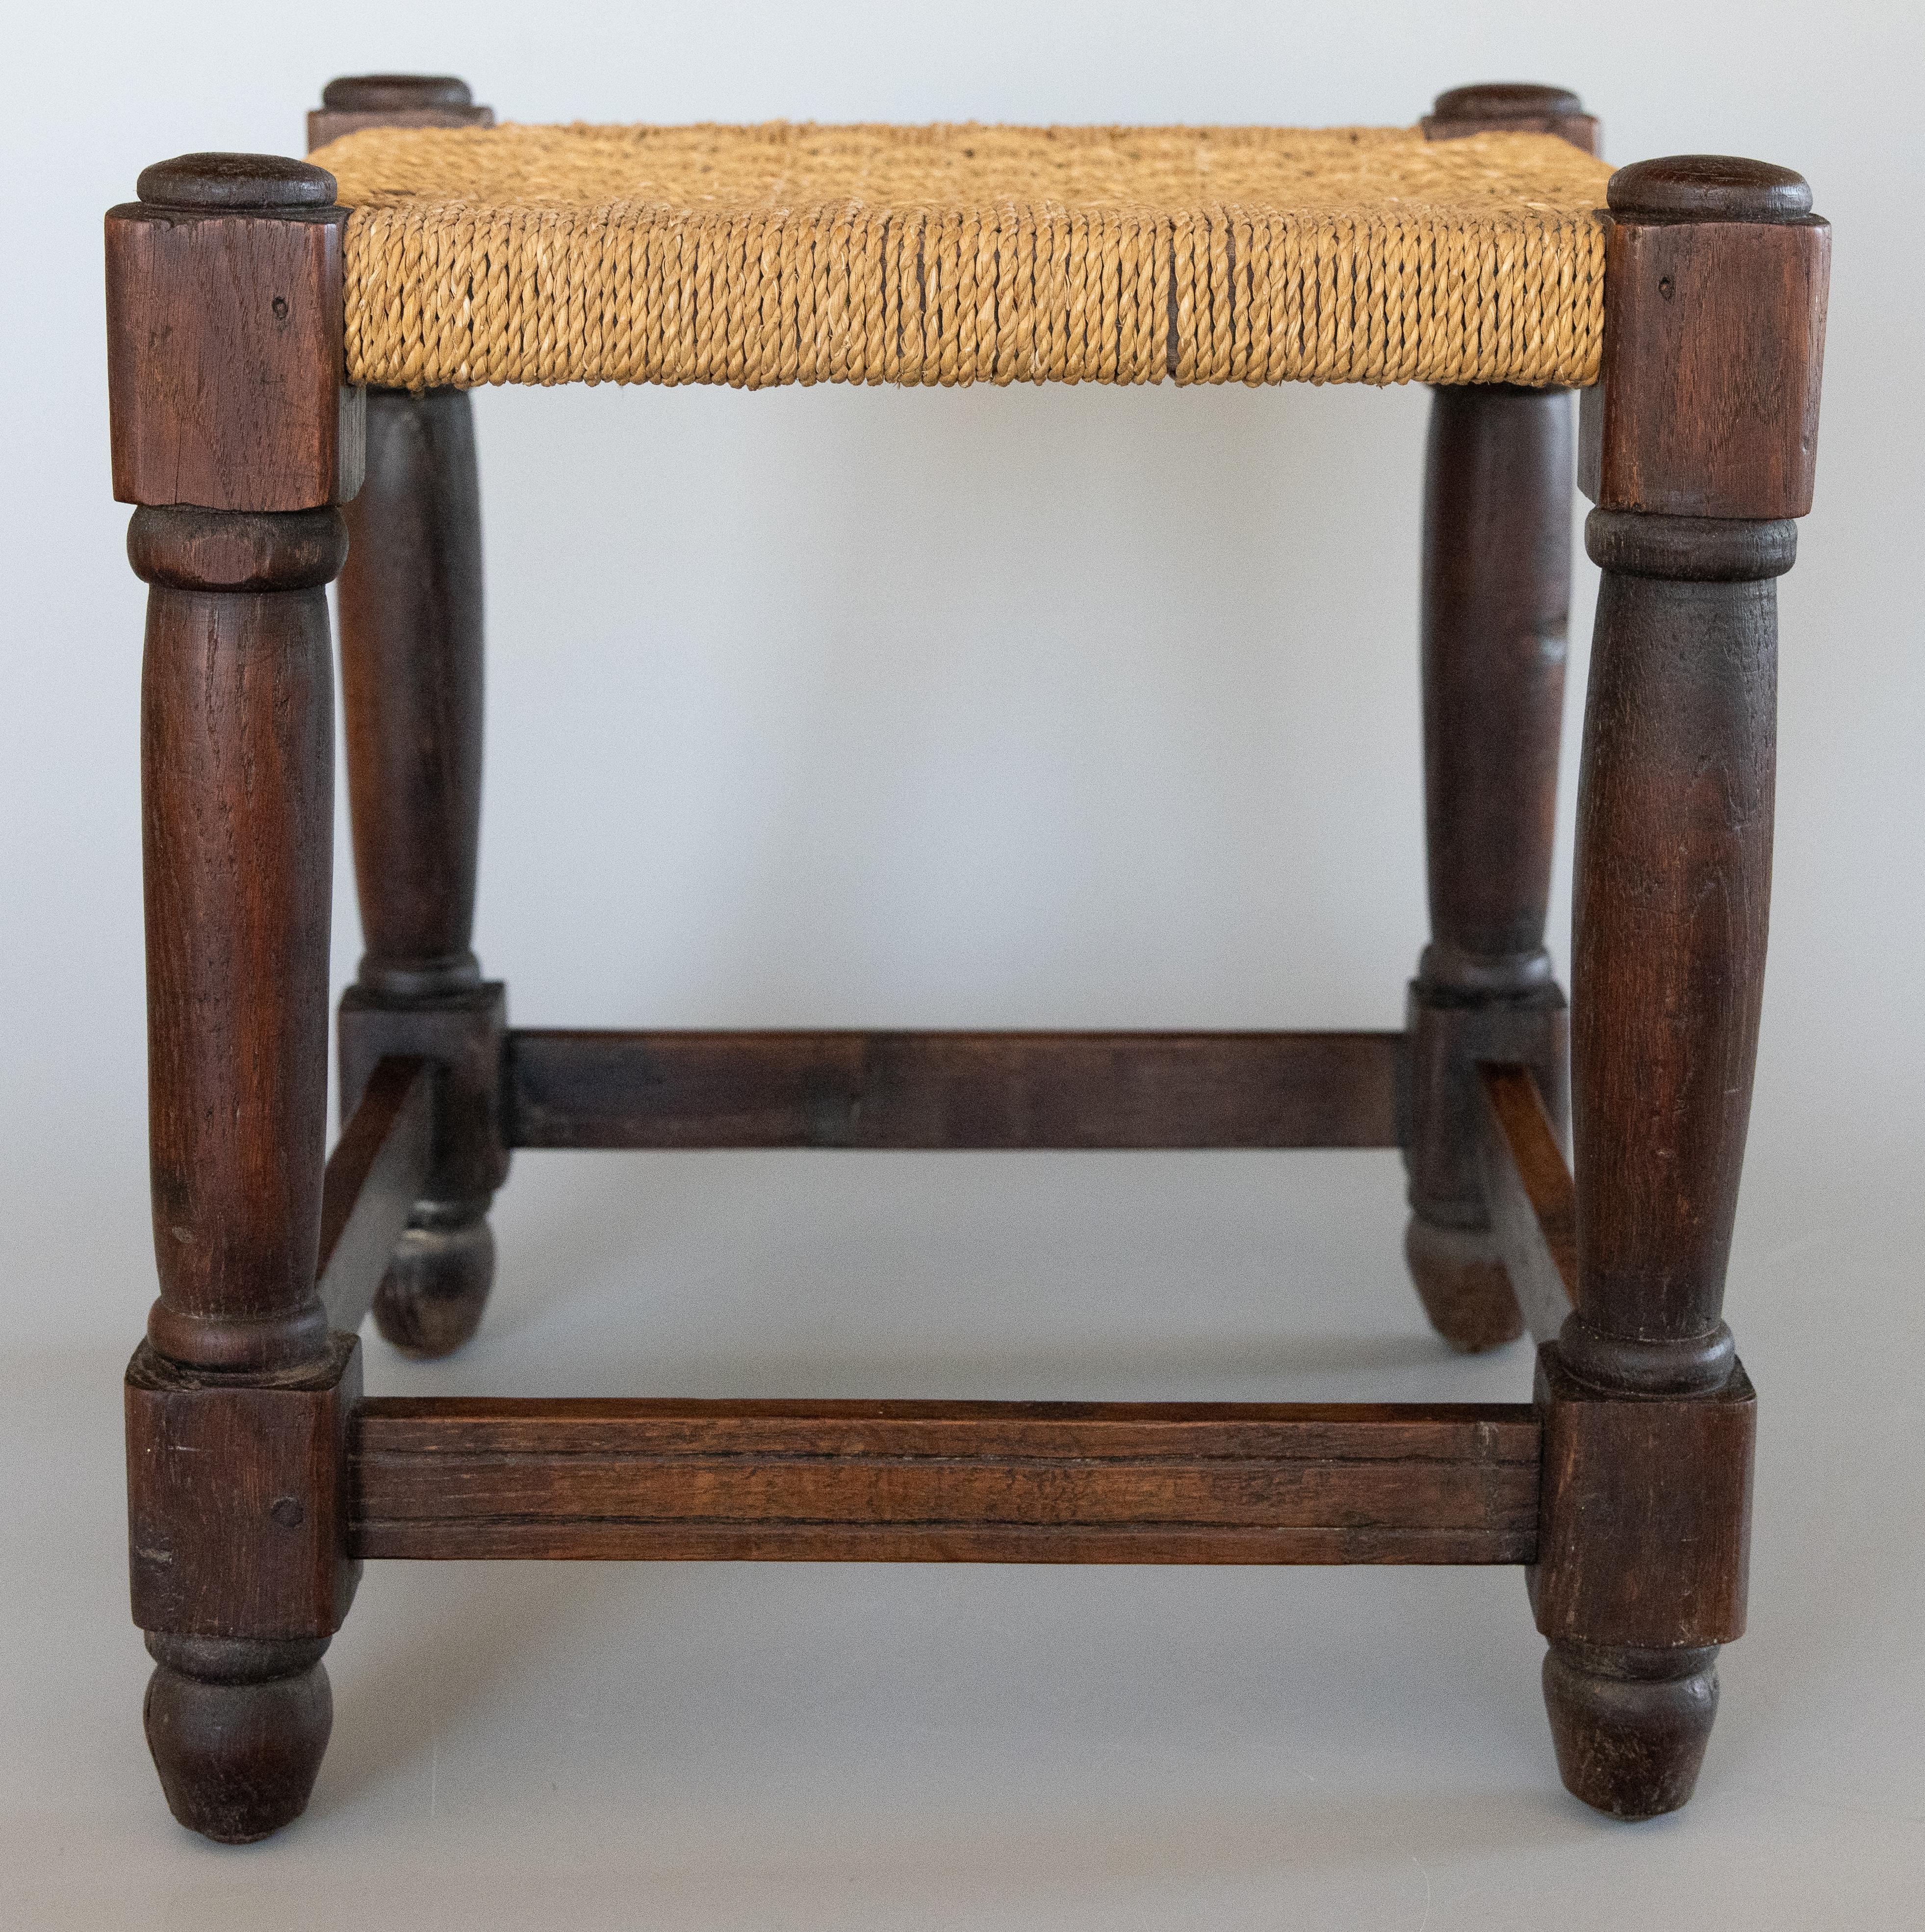 Hand-Woven Antique English Oak Woven Cord Rope Stool Footstool, circa 1900 For Sale